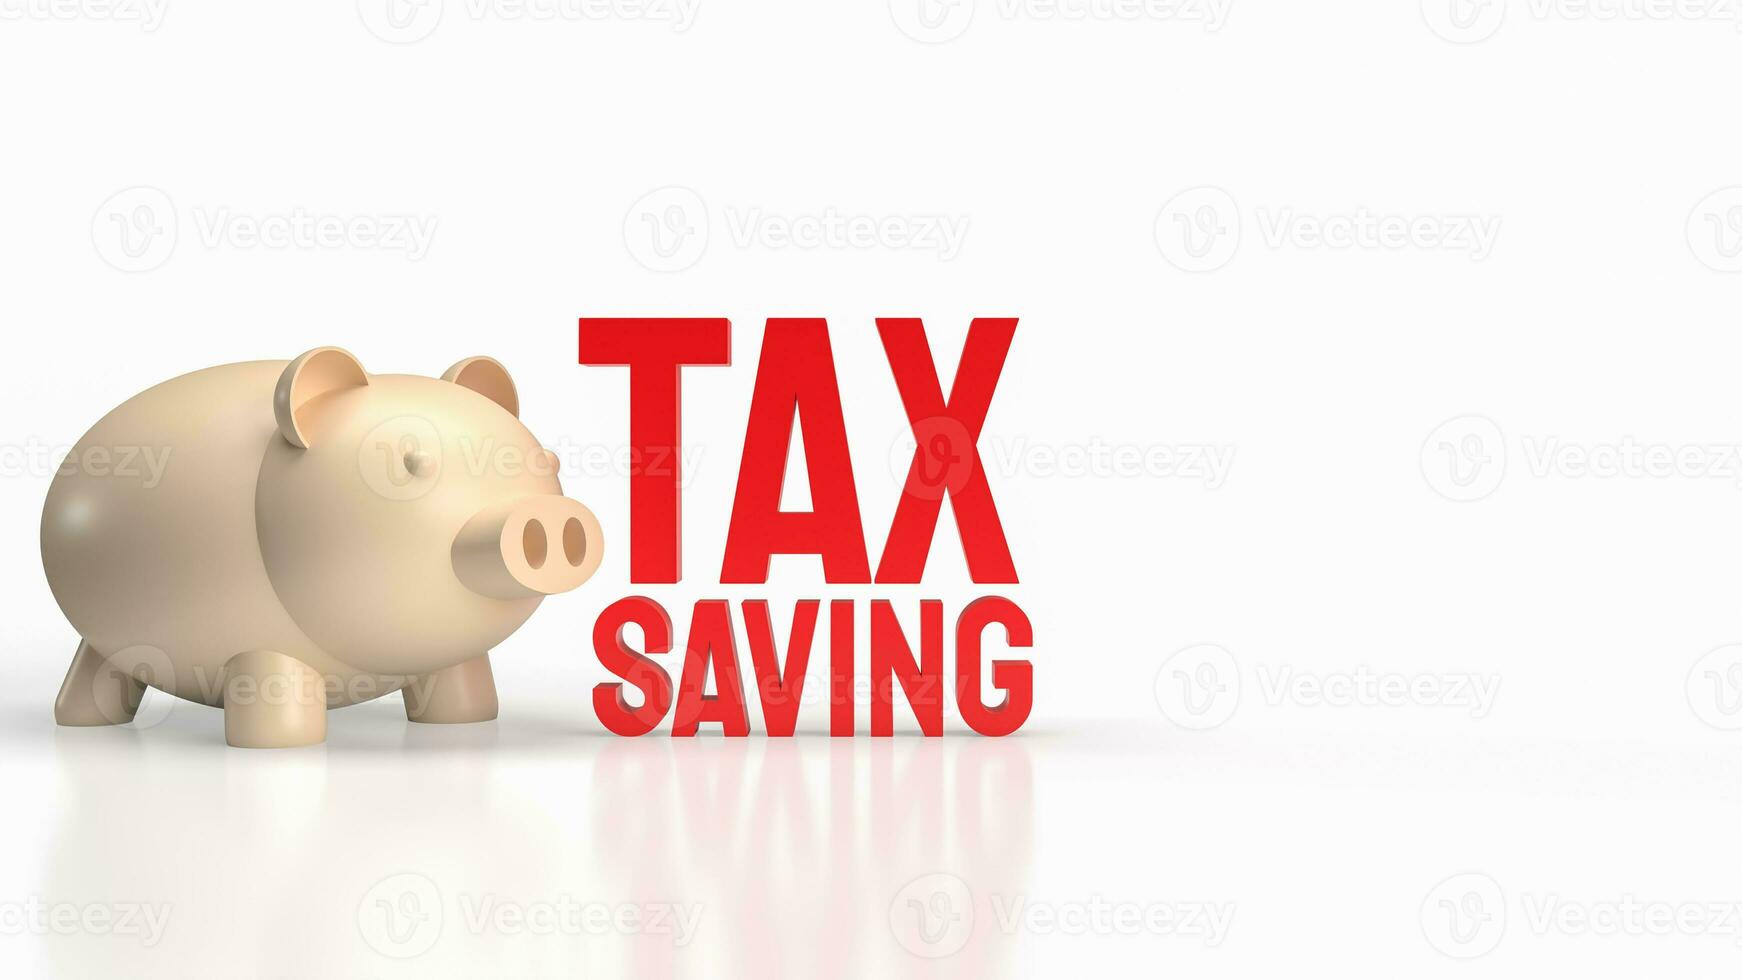 The piggy bank and text for tax saving concept 3d rendering. photo